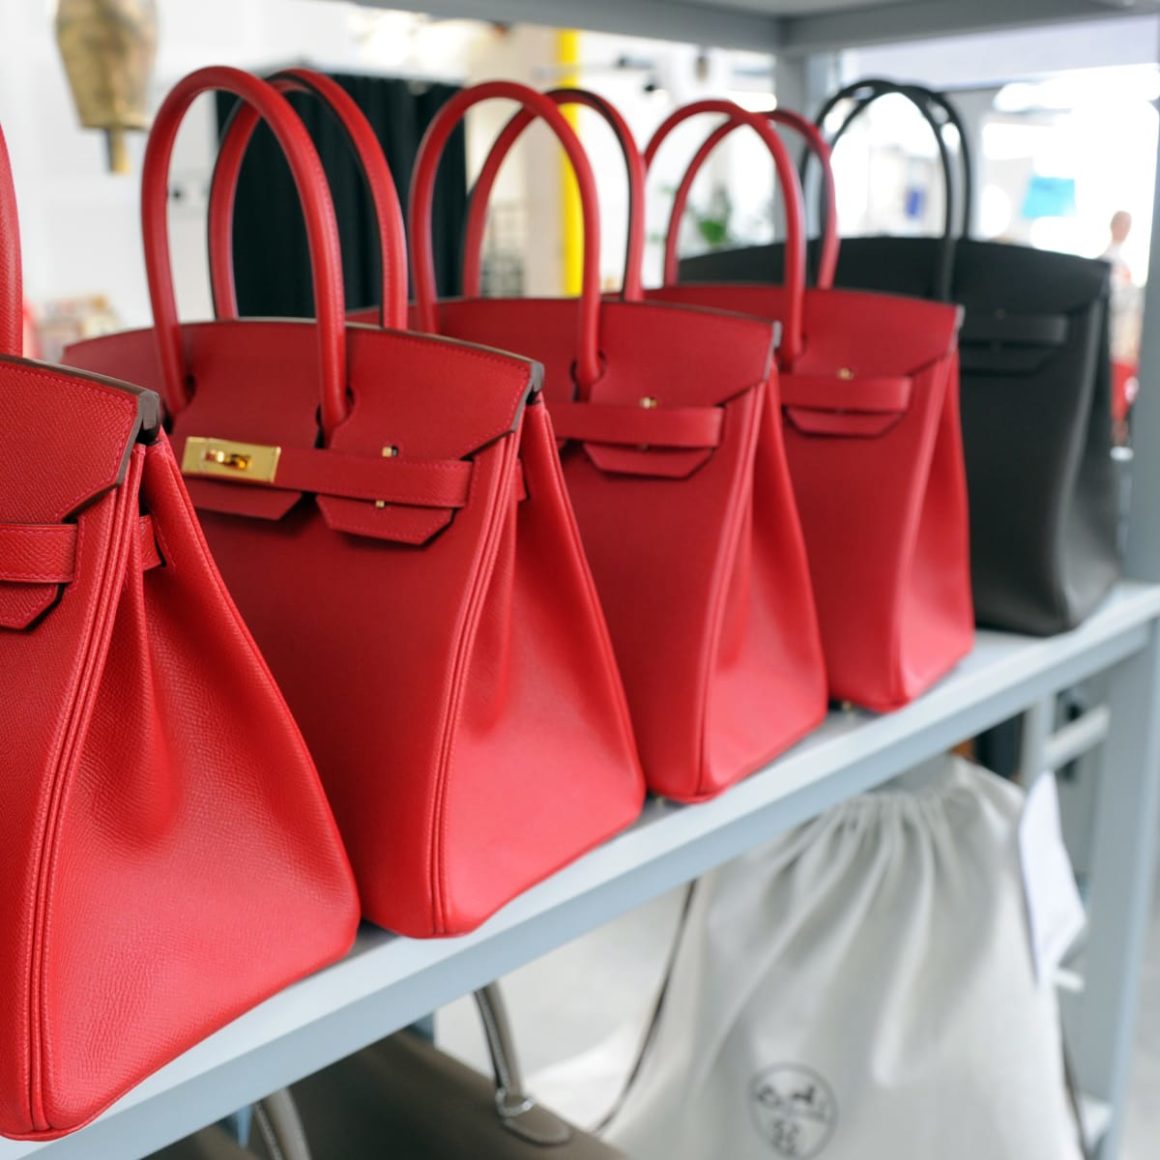 Discover the epitome of luxury! Our collection of Birkin bags and